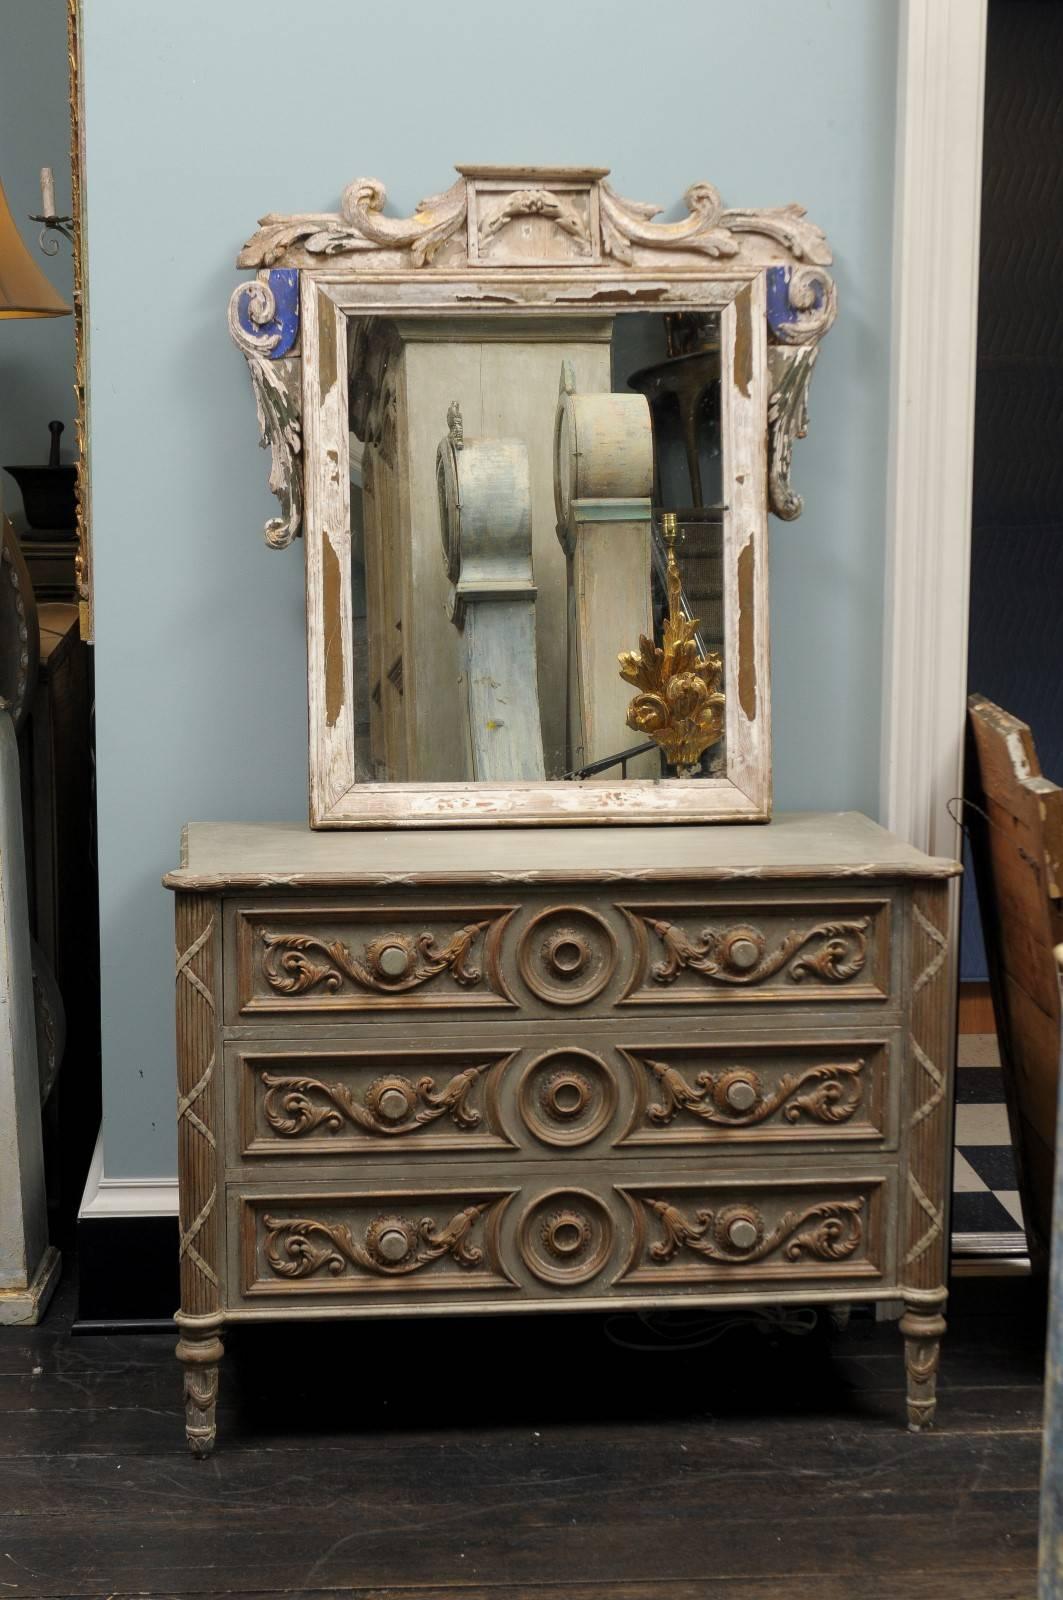 Italian 19th Century Carved Wood Mirror with Volutes Motifs and Blue Accents 5